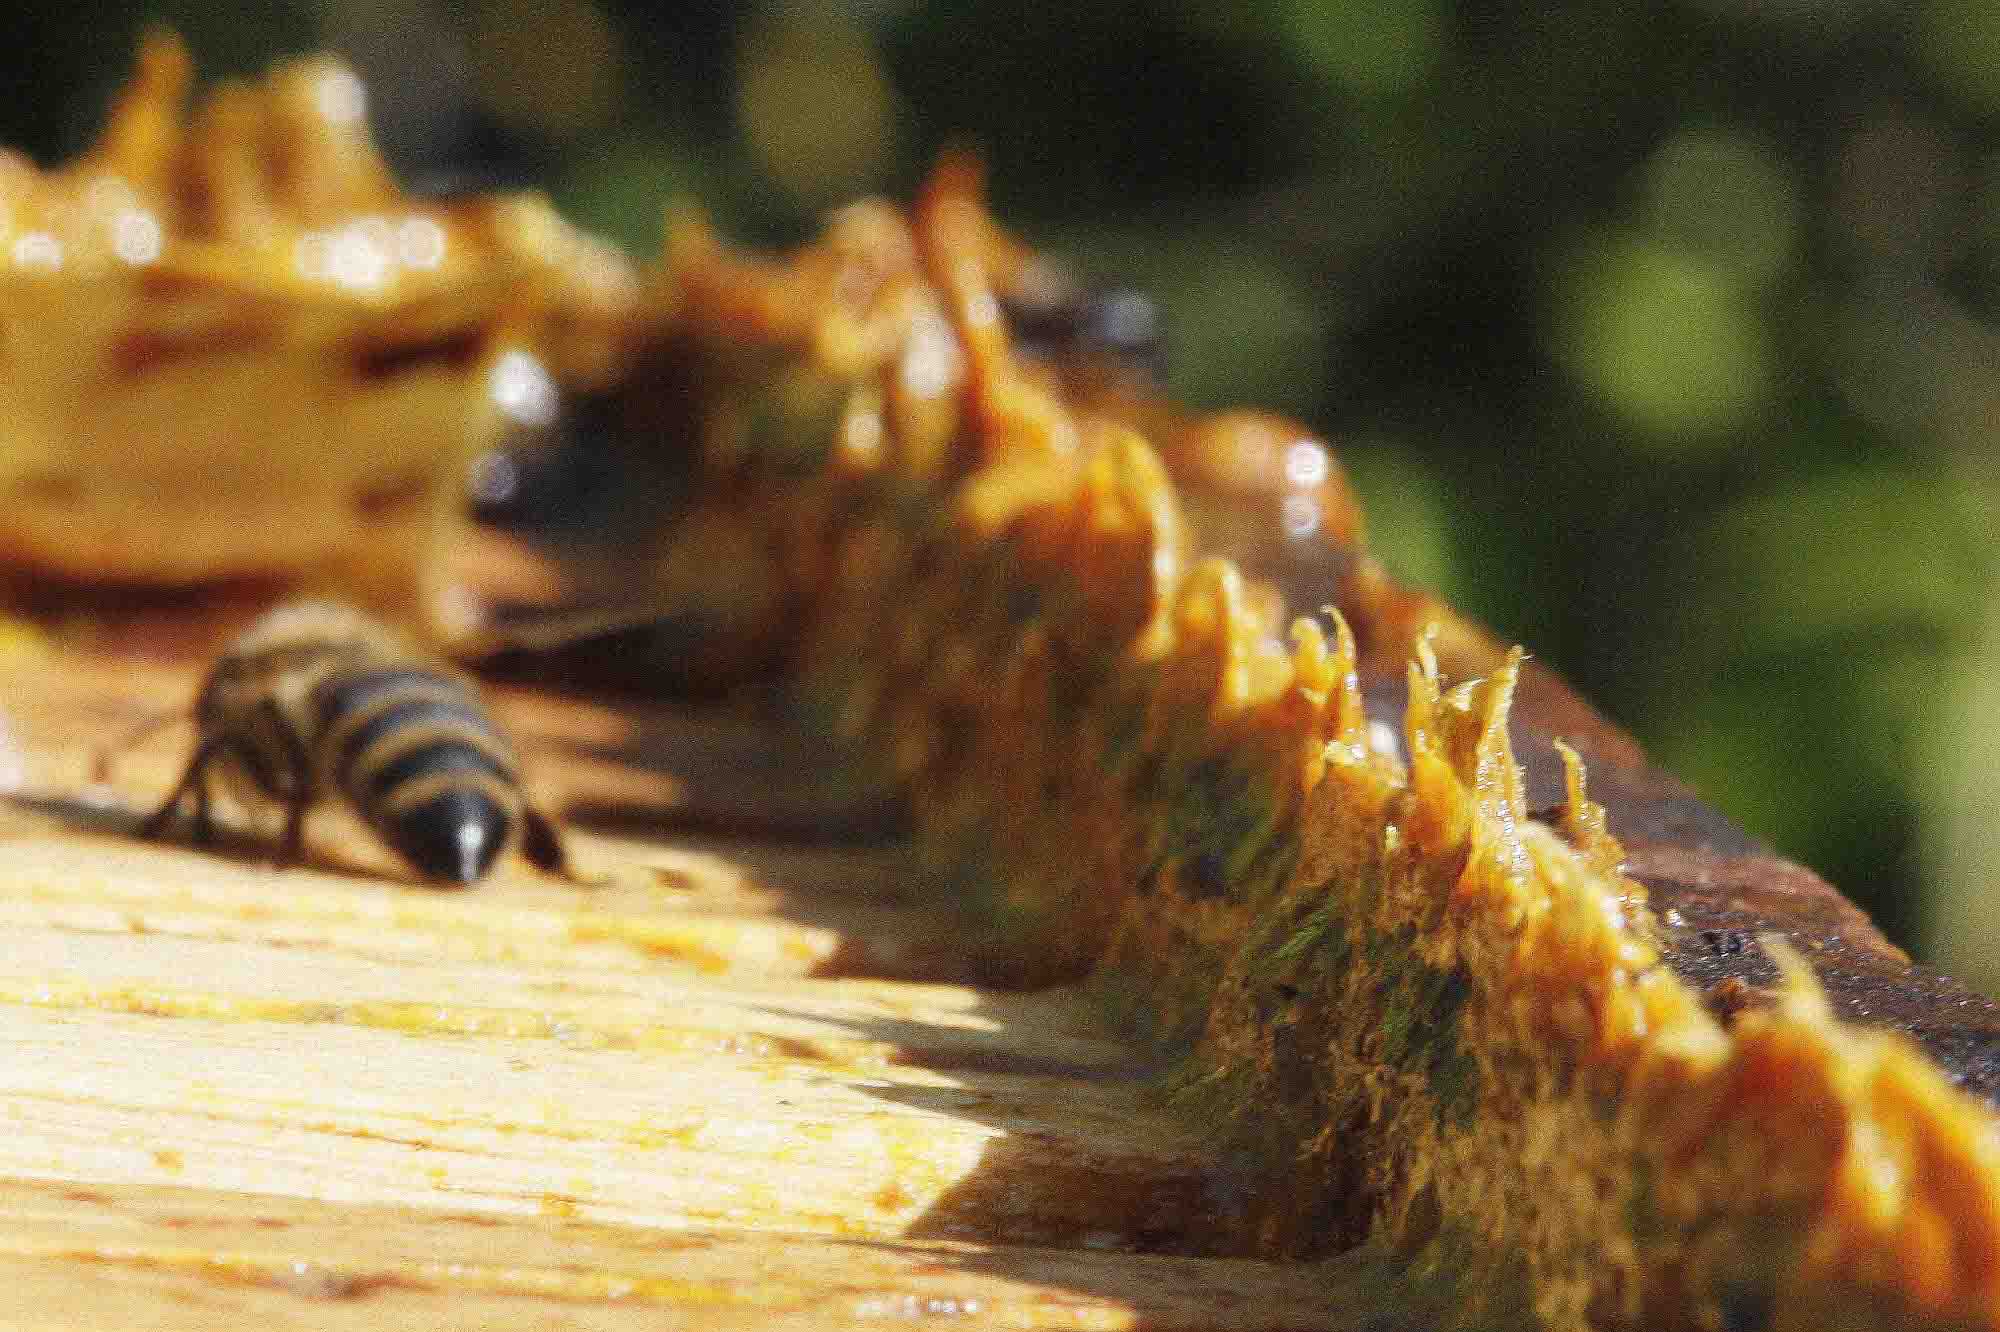 Green Propolis Found To Alter Cancer Cells